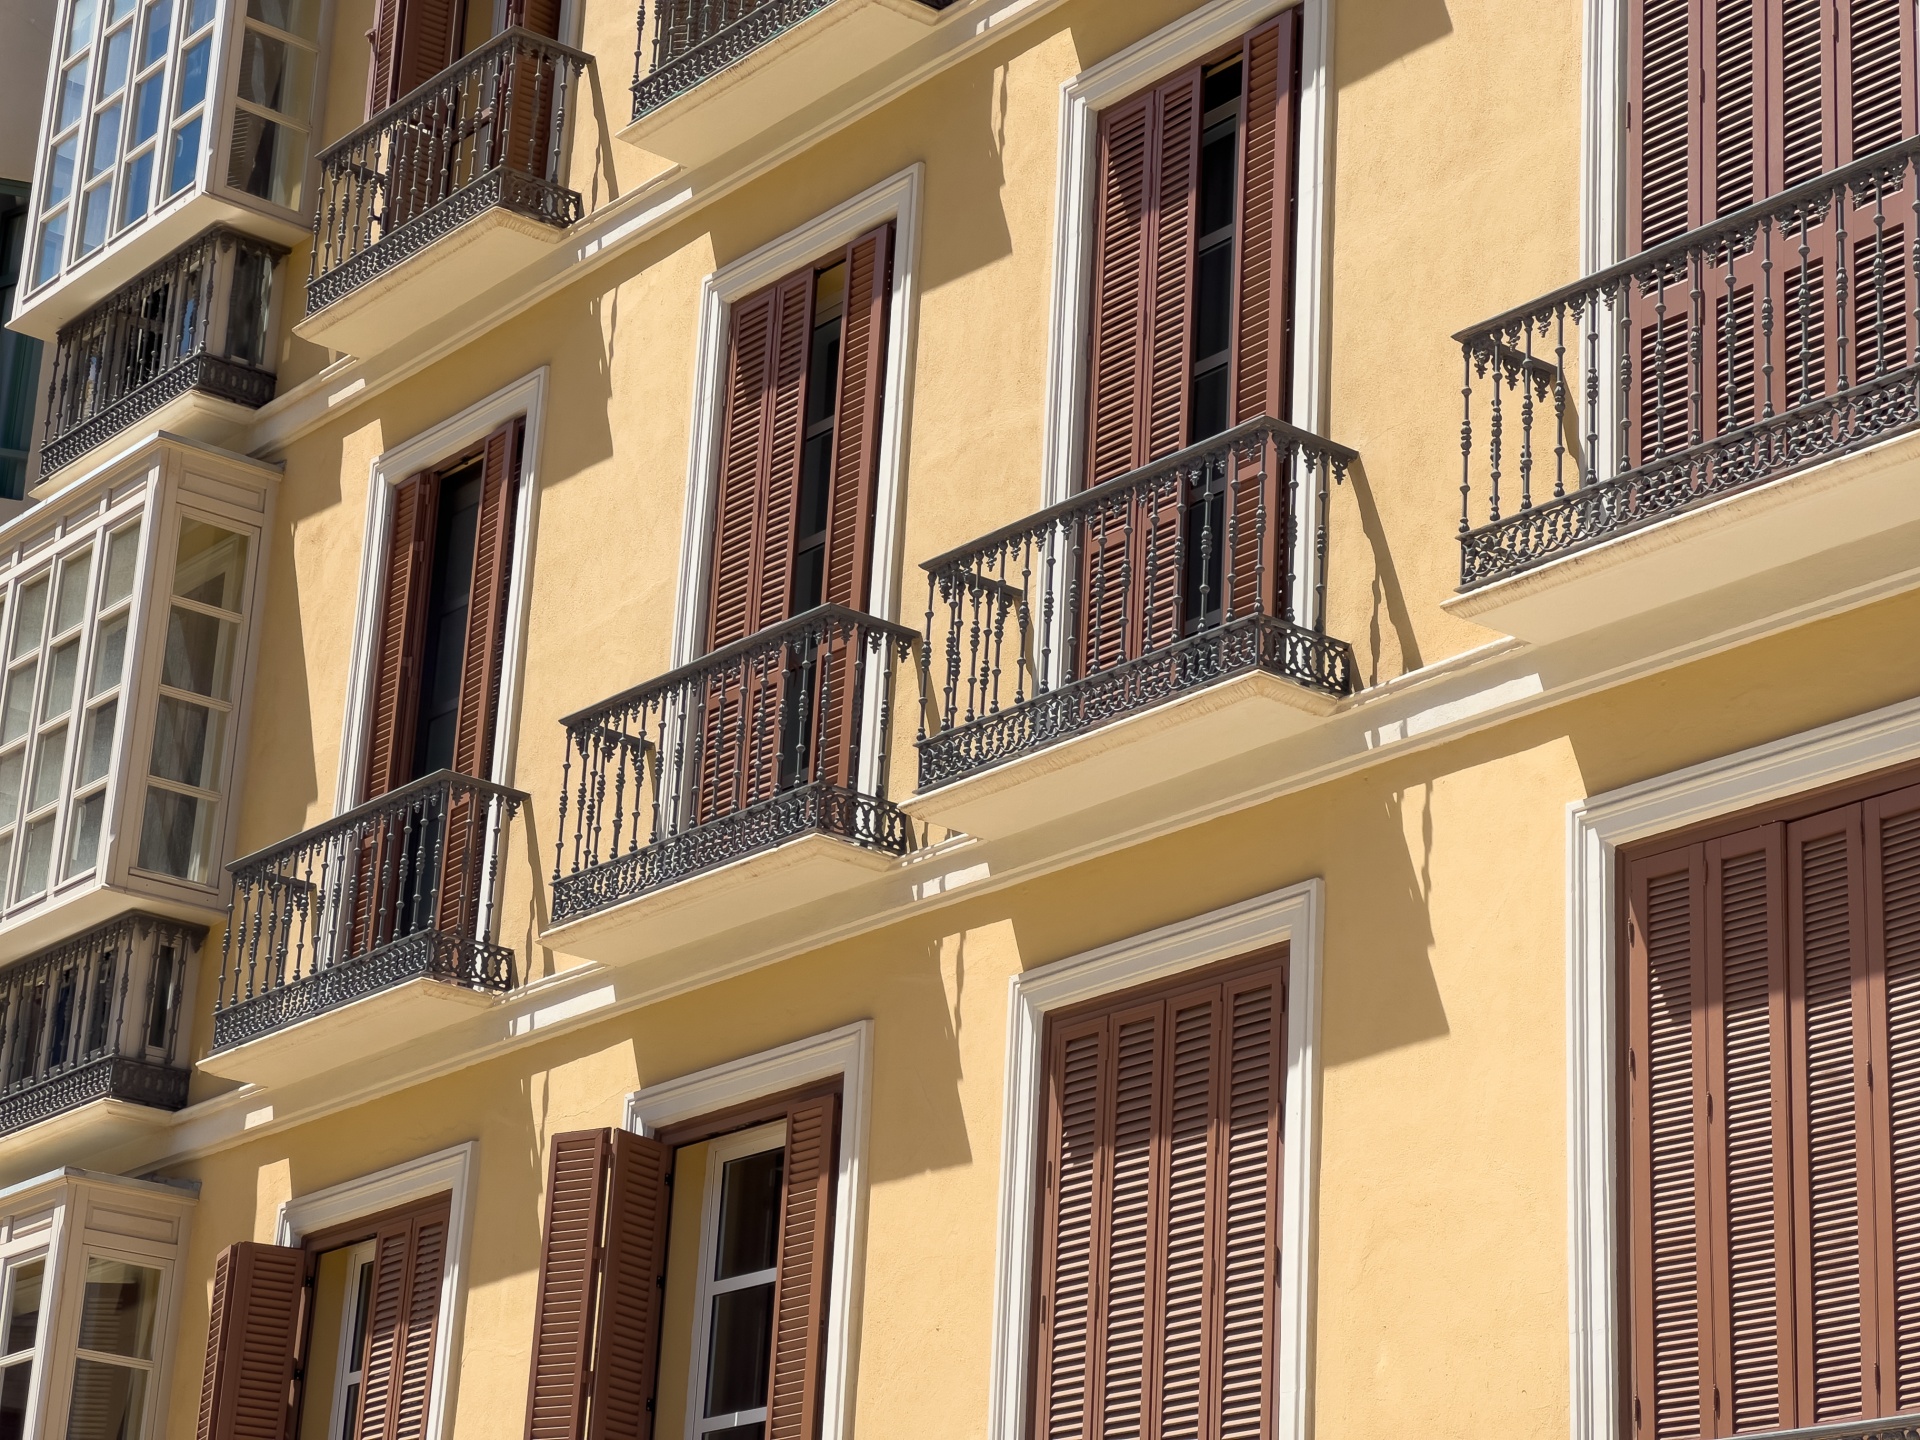 Windows and balconies with shutters on a historic building in Spain